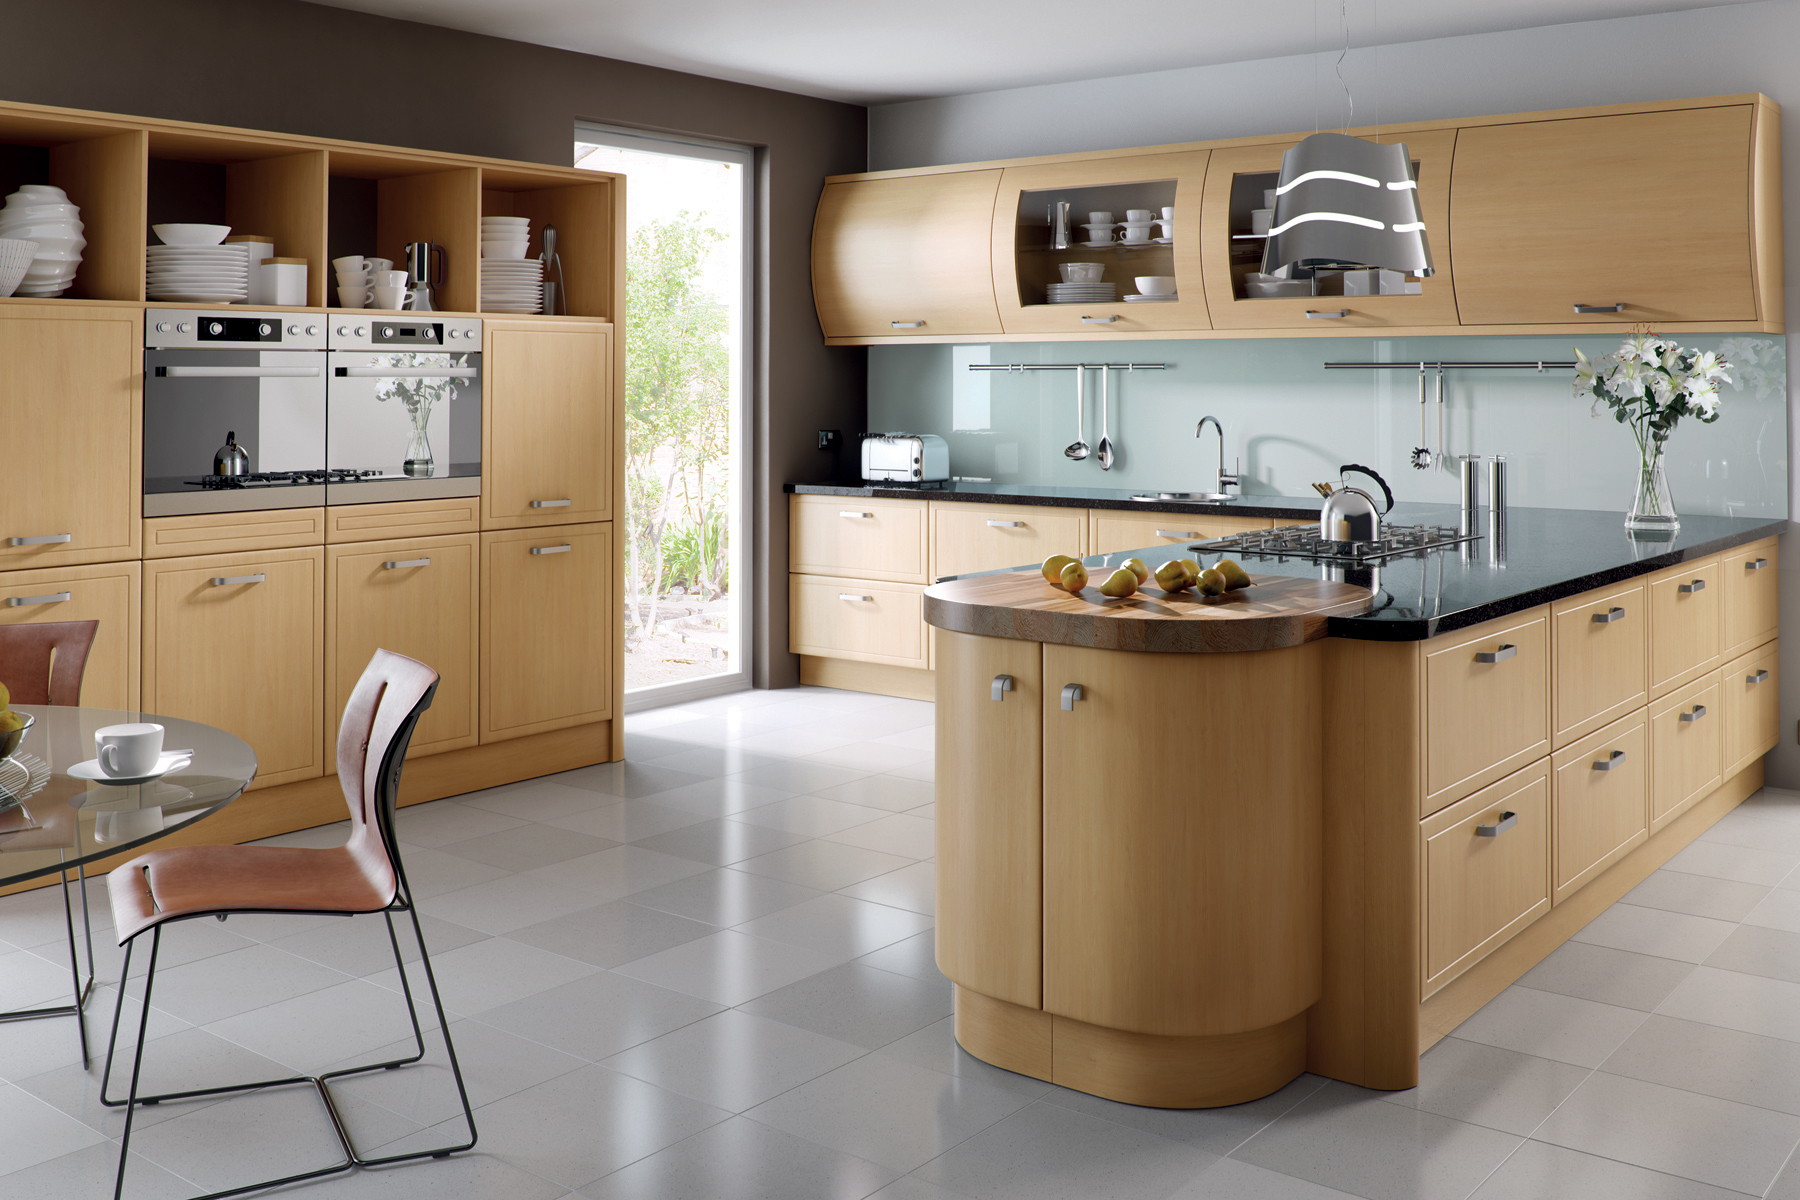 Had a quote from Wren Kitchens Bournemouth